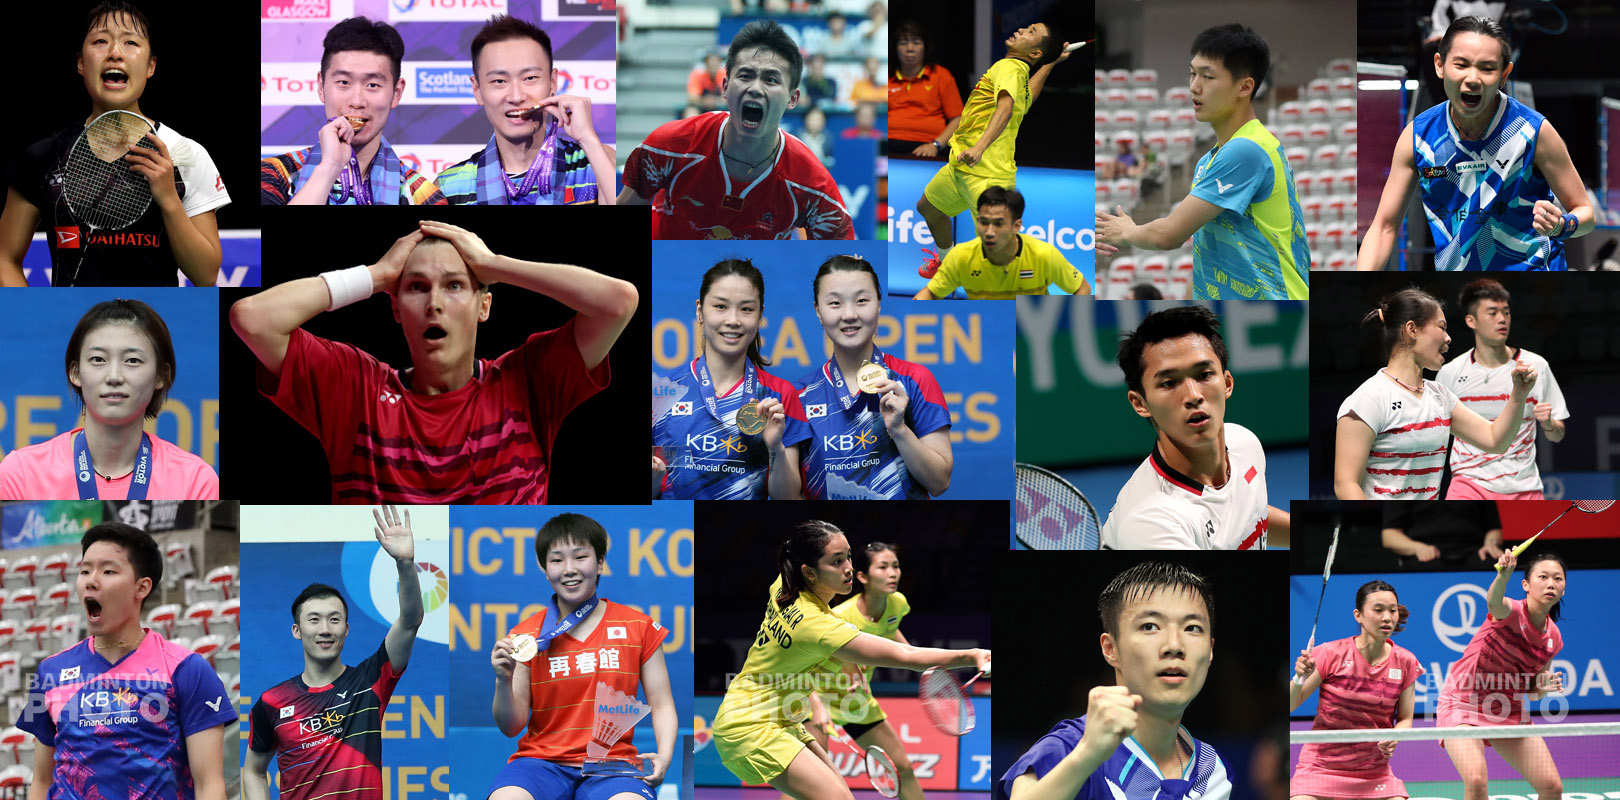 World Championship, SEA Games, and Universiade gold medallists are due in Seoul next week, along with most of the defending champions for the last edition of the Korea Open as […]